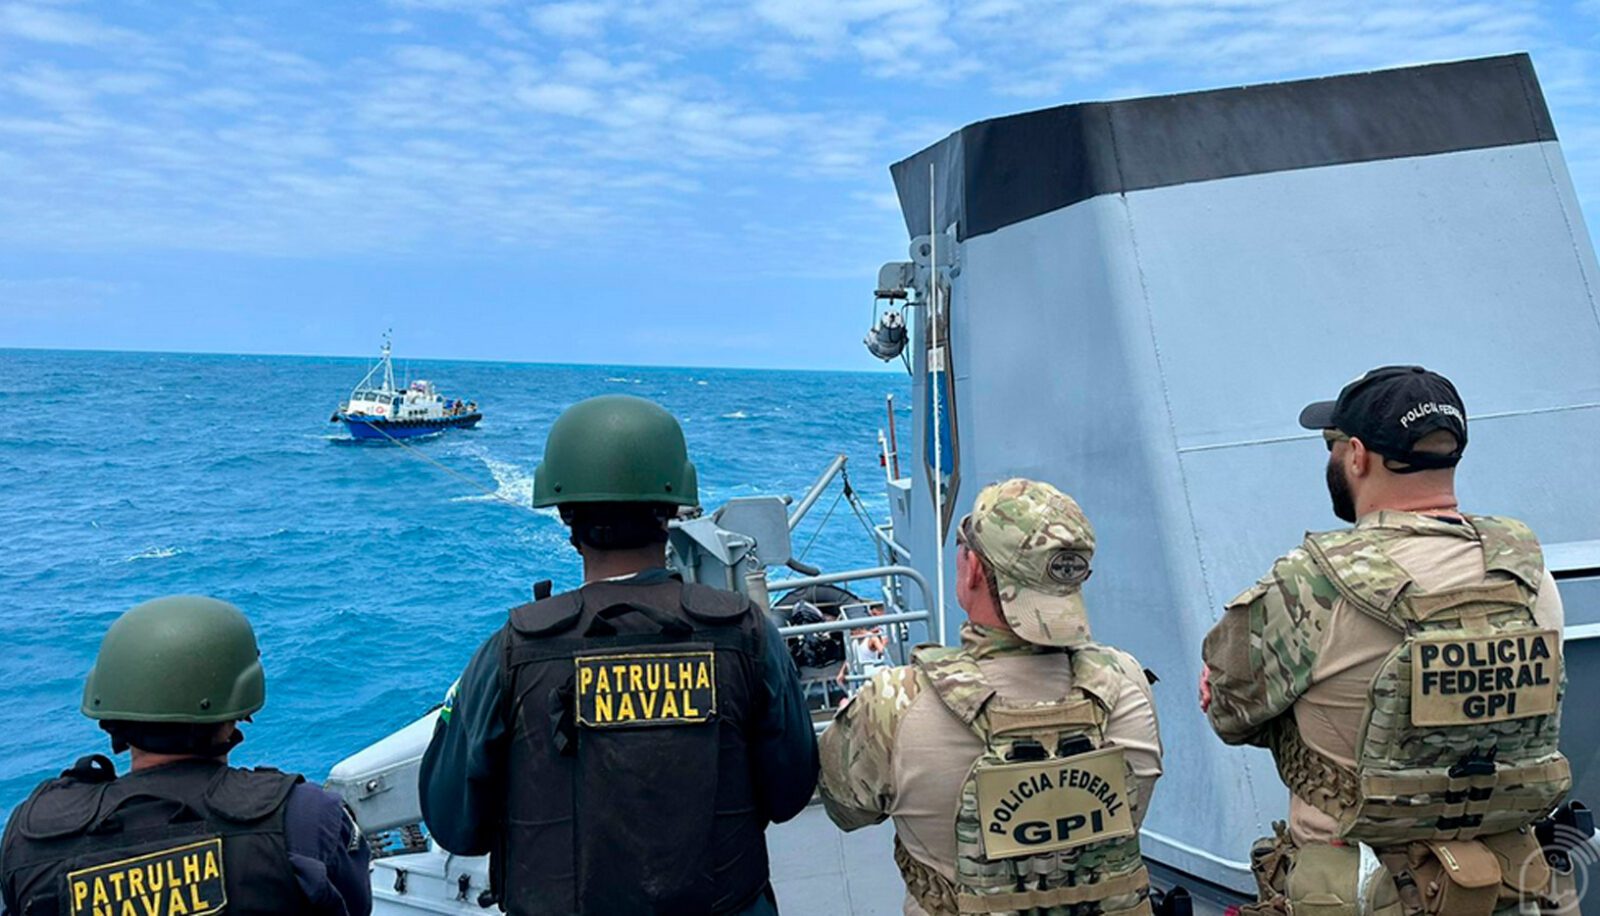 Brazilian Navy and Federal Police seize 3.6 tons of cocaine off the coast of Pernambuco